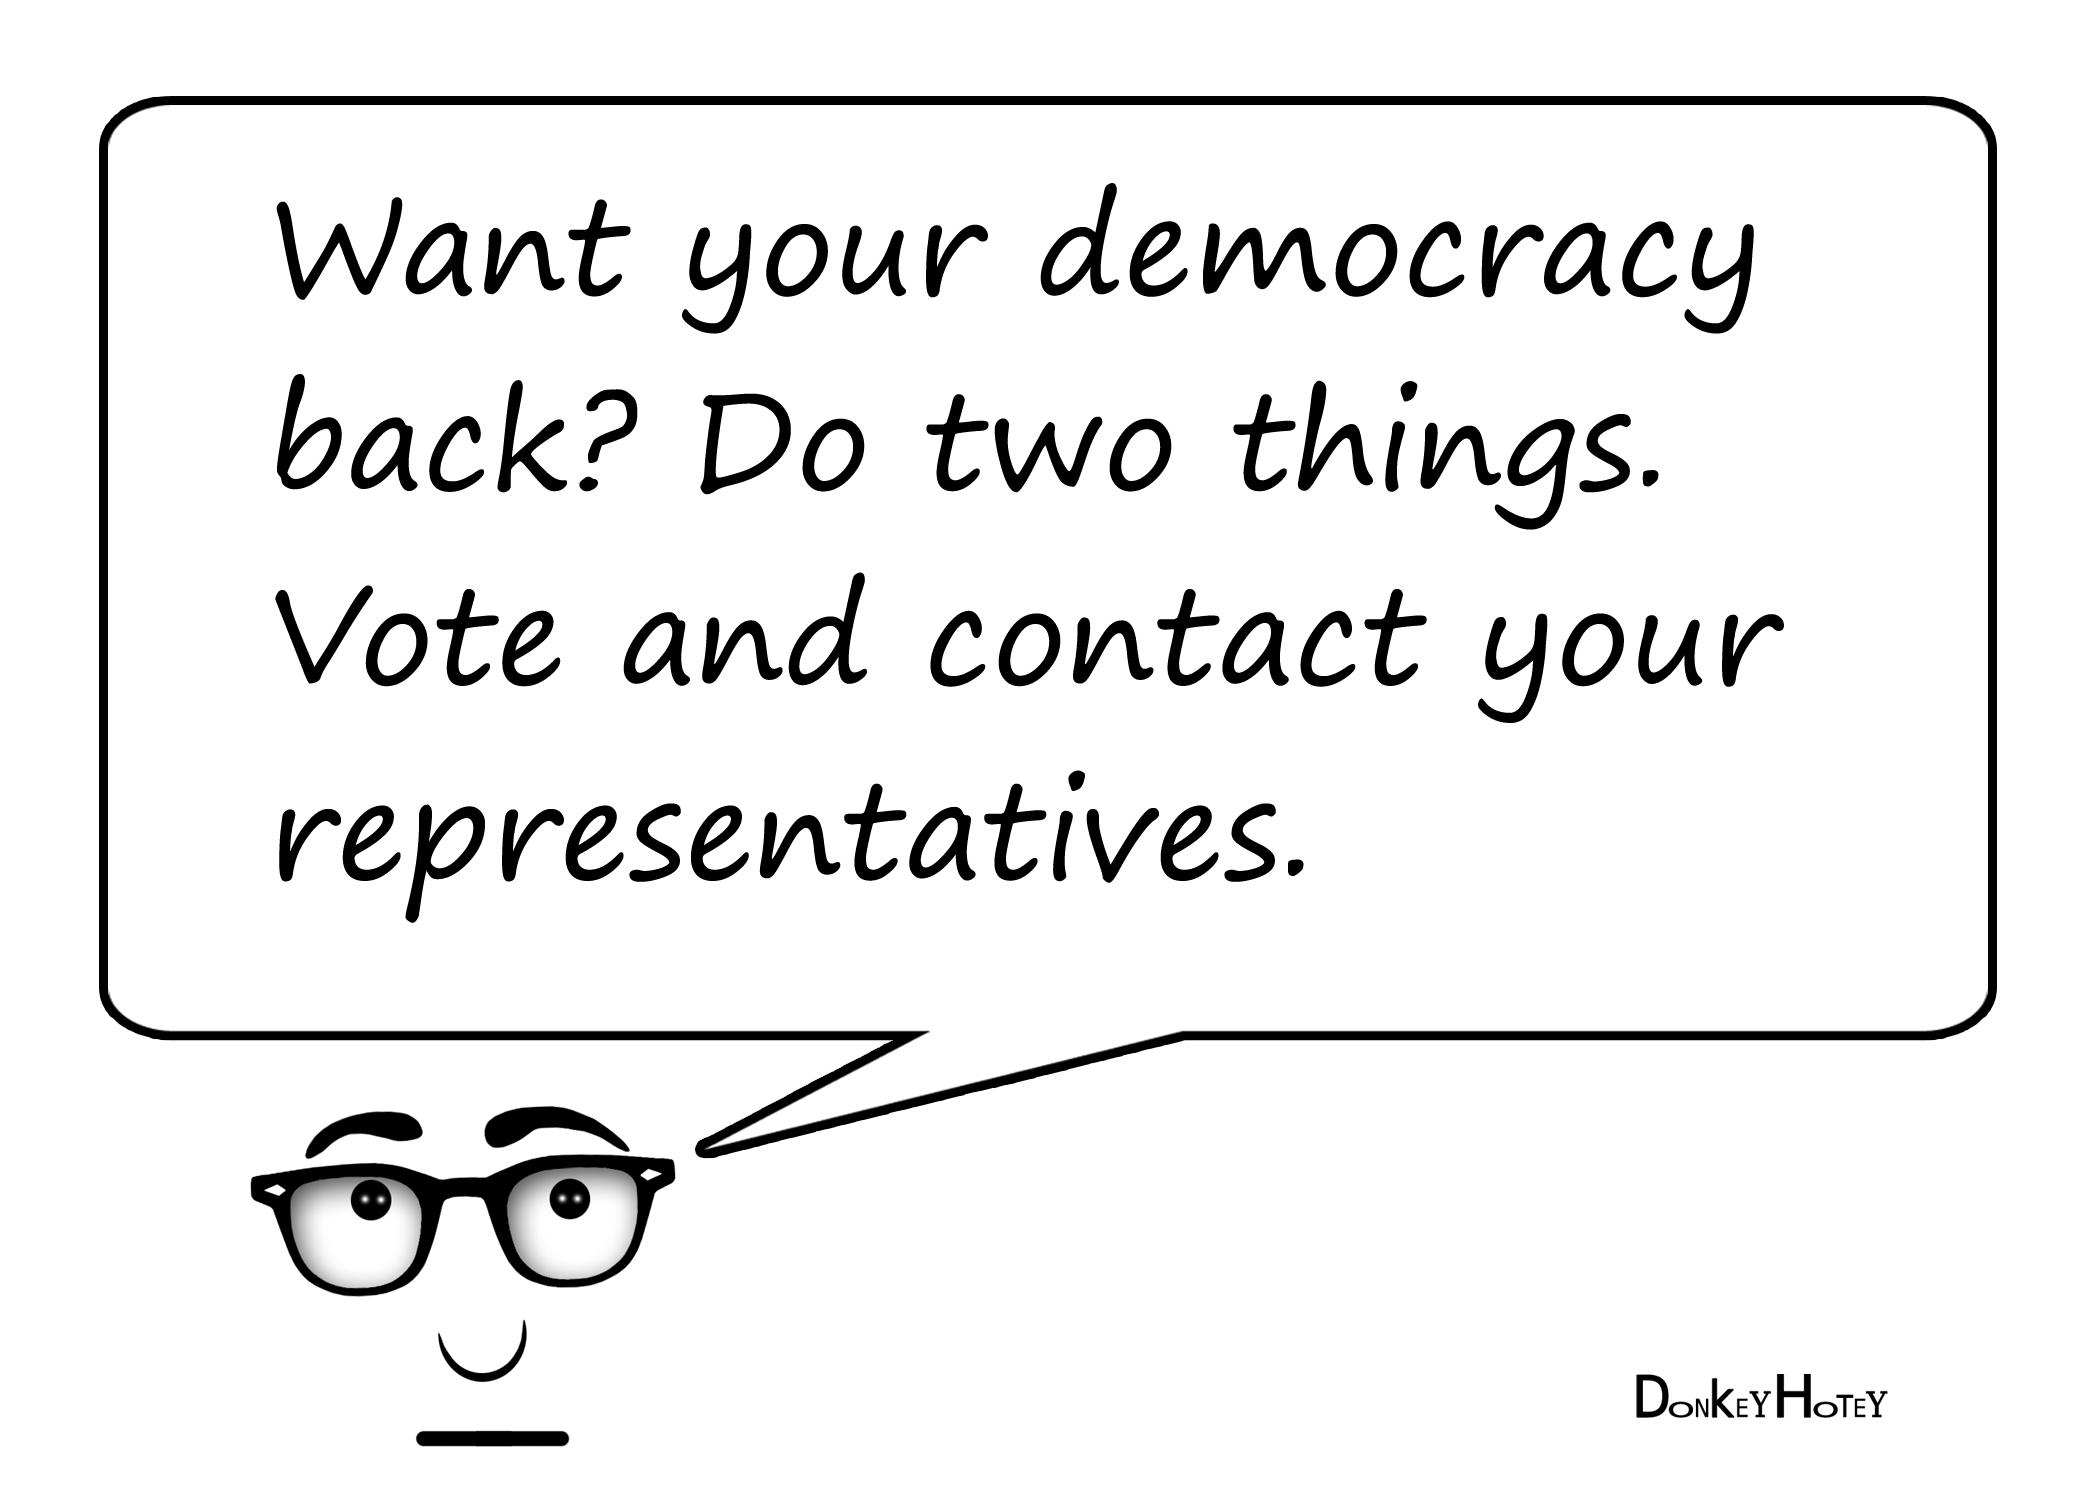 Want your democracy back? Do two things. Vote and contact your representatives.